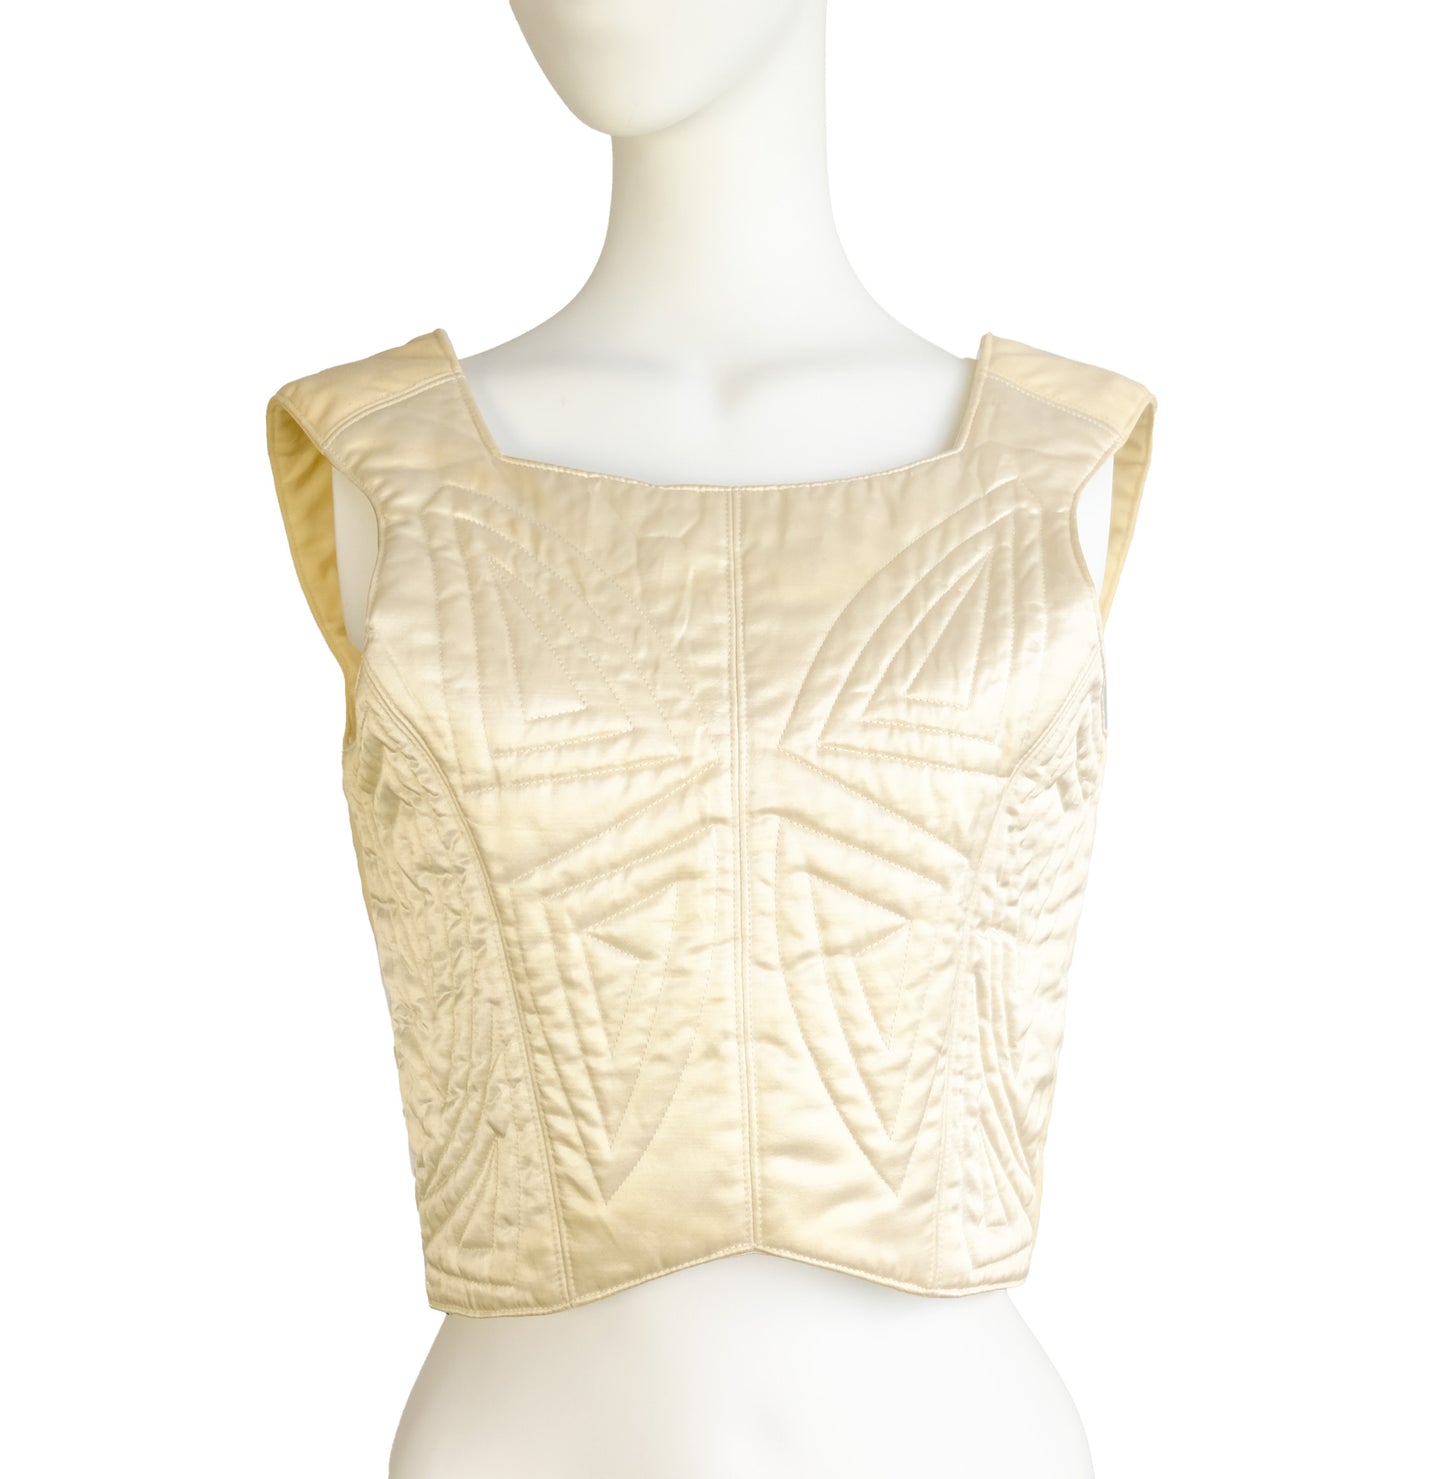 John Galliano London Vintage Lace-up Quilted "Fencing" Corset, S